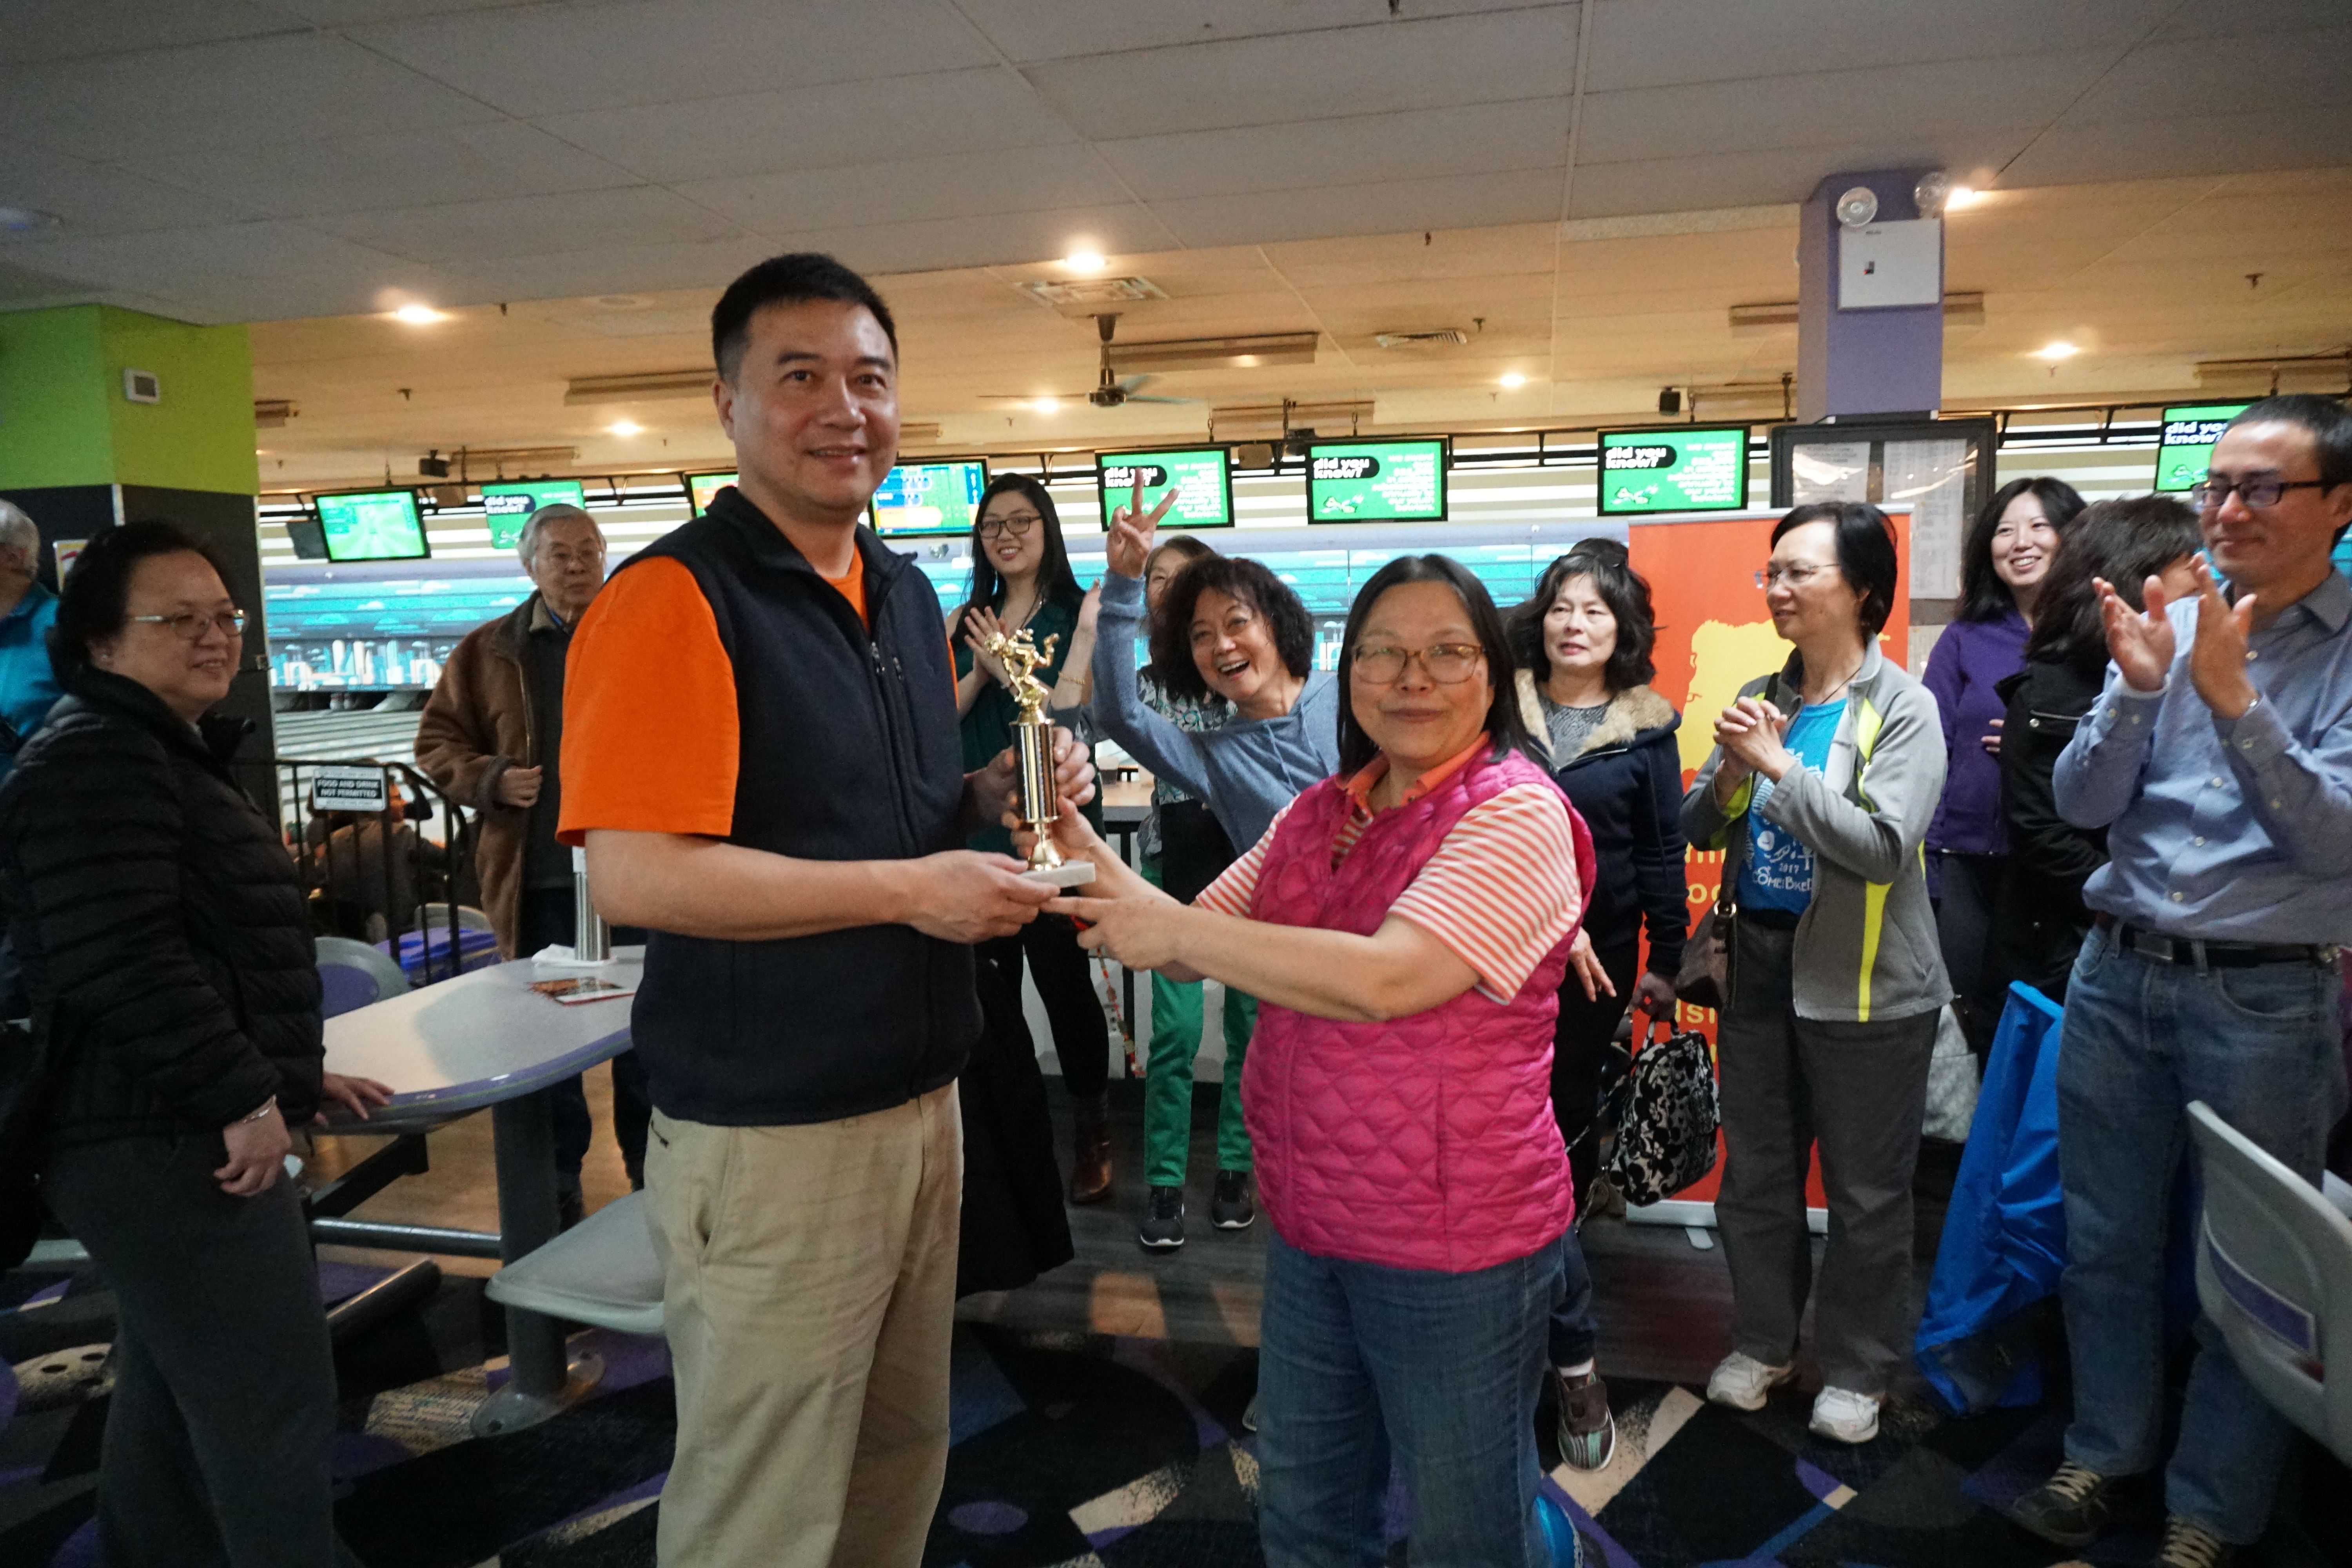 Bowling Picture – #531